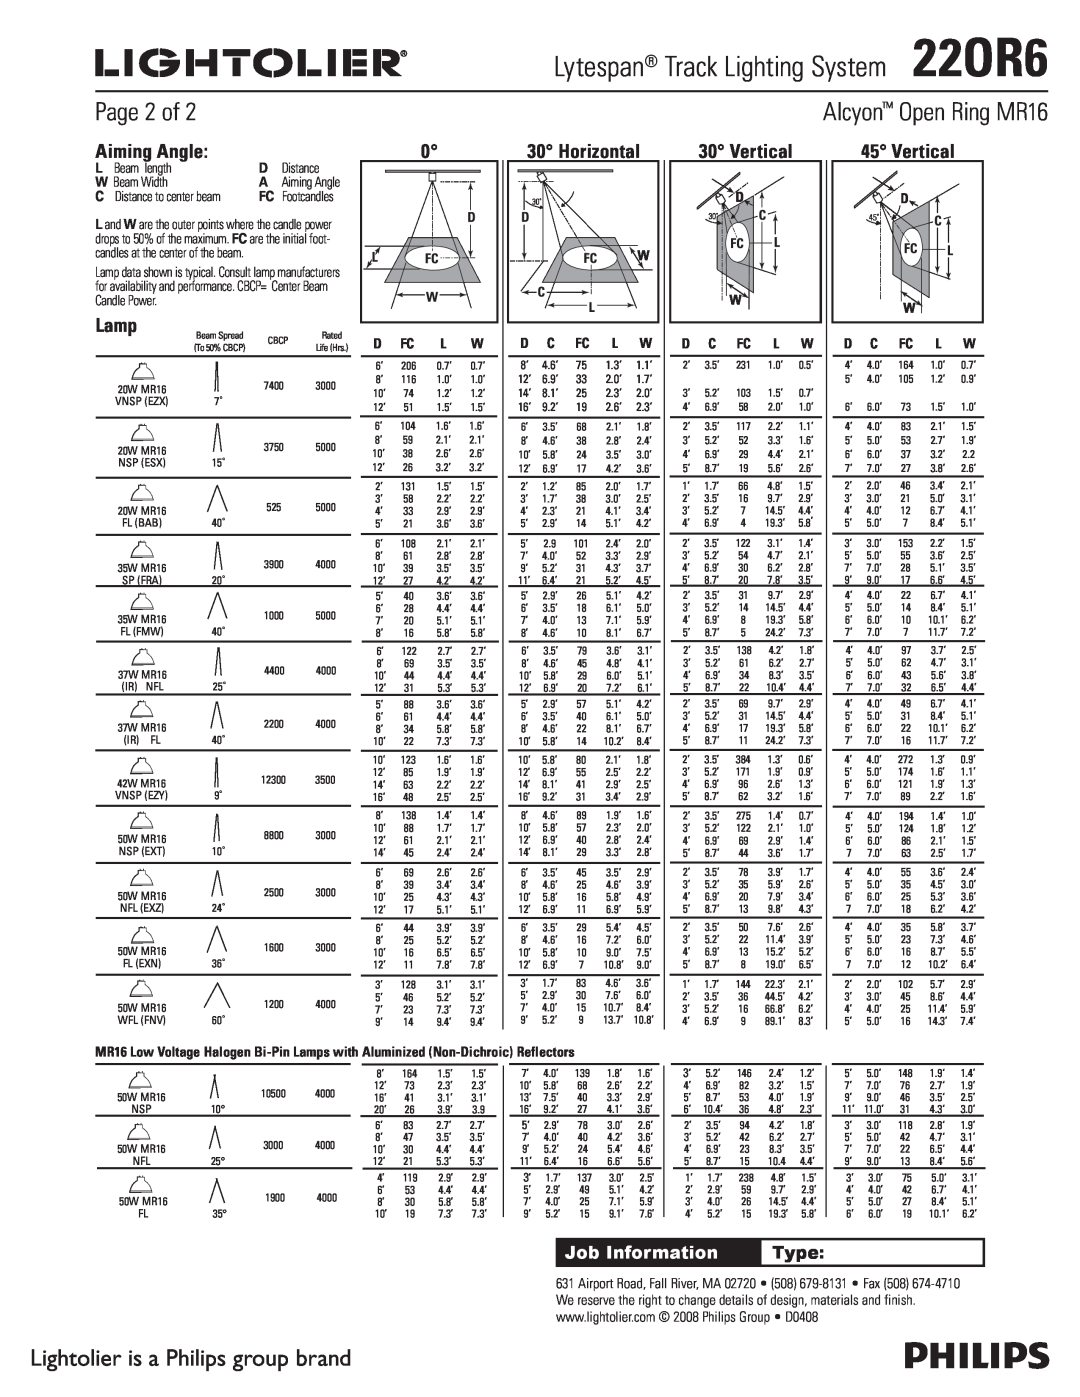 Lightolier 22OR6 manual Alcyon Open Ring MR16, Page 2 of, Aiming Angle, Lamp, Horizontal, Vertical, Job Information, Type 